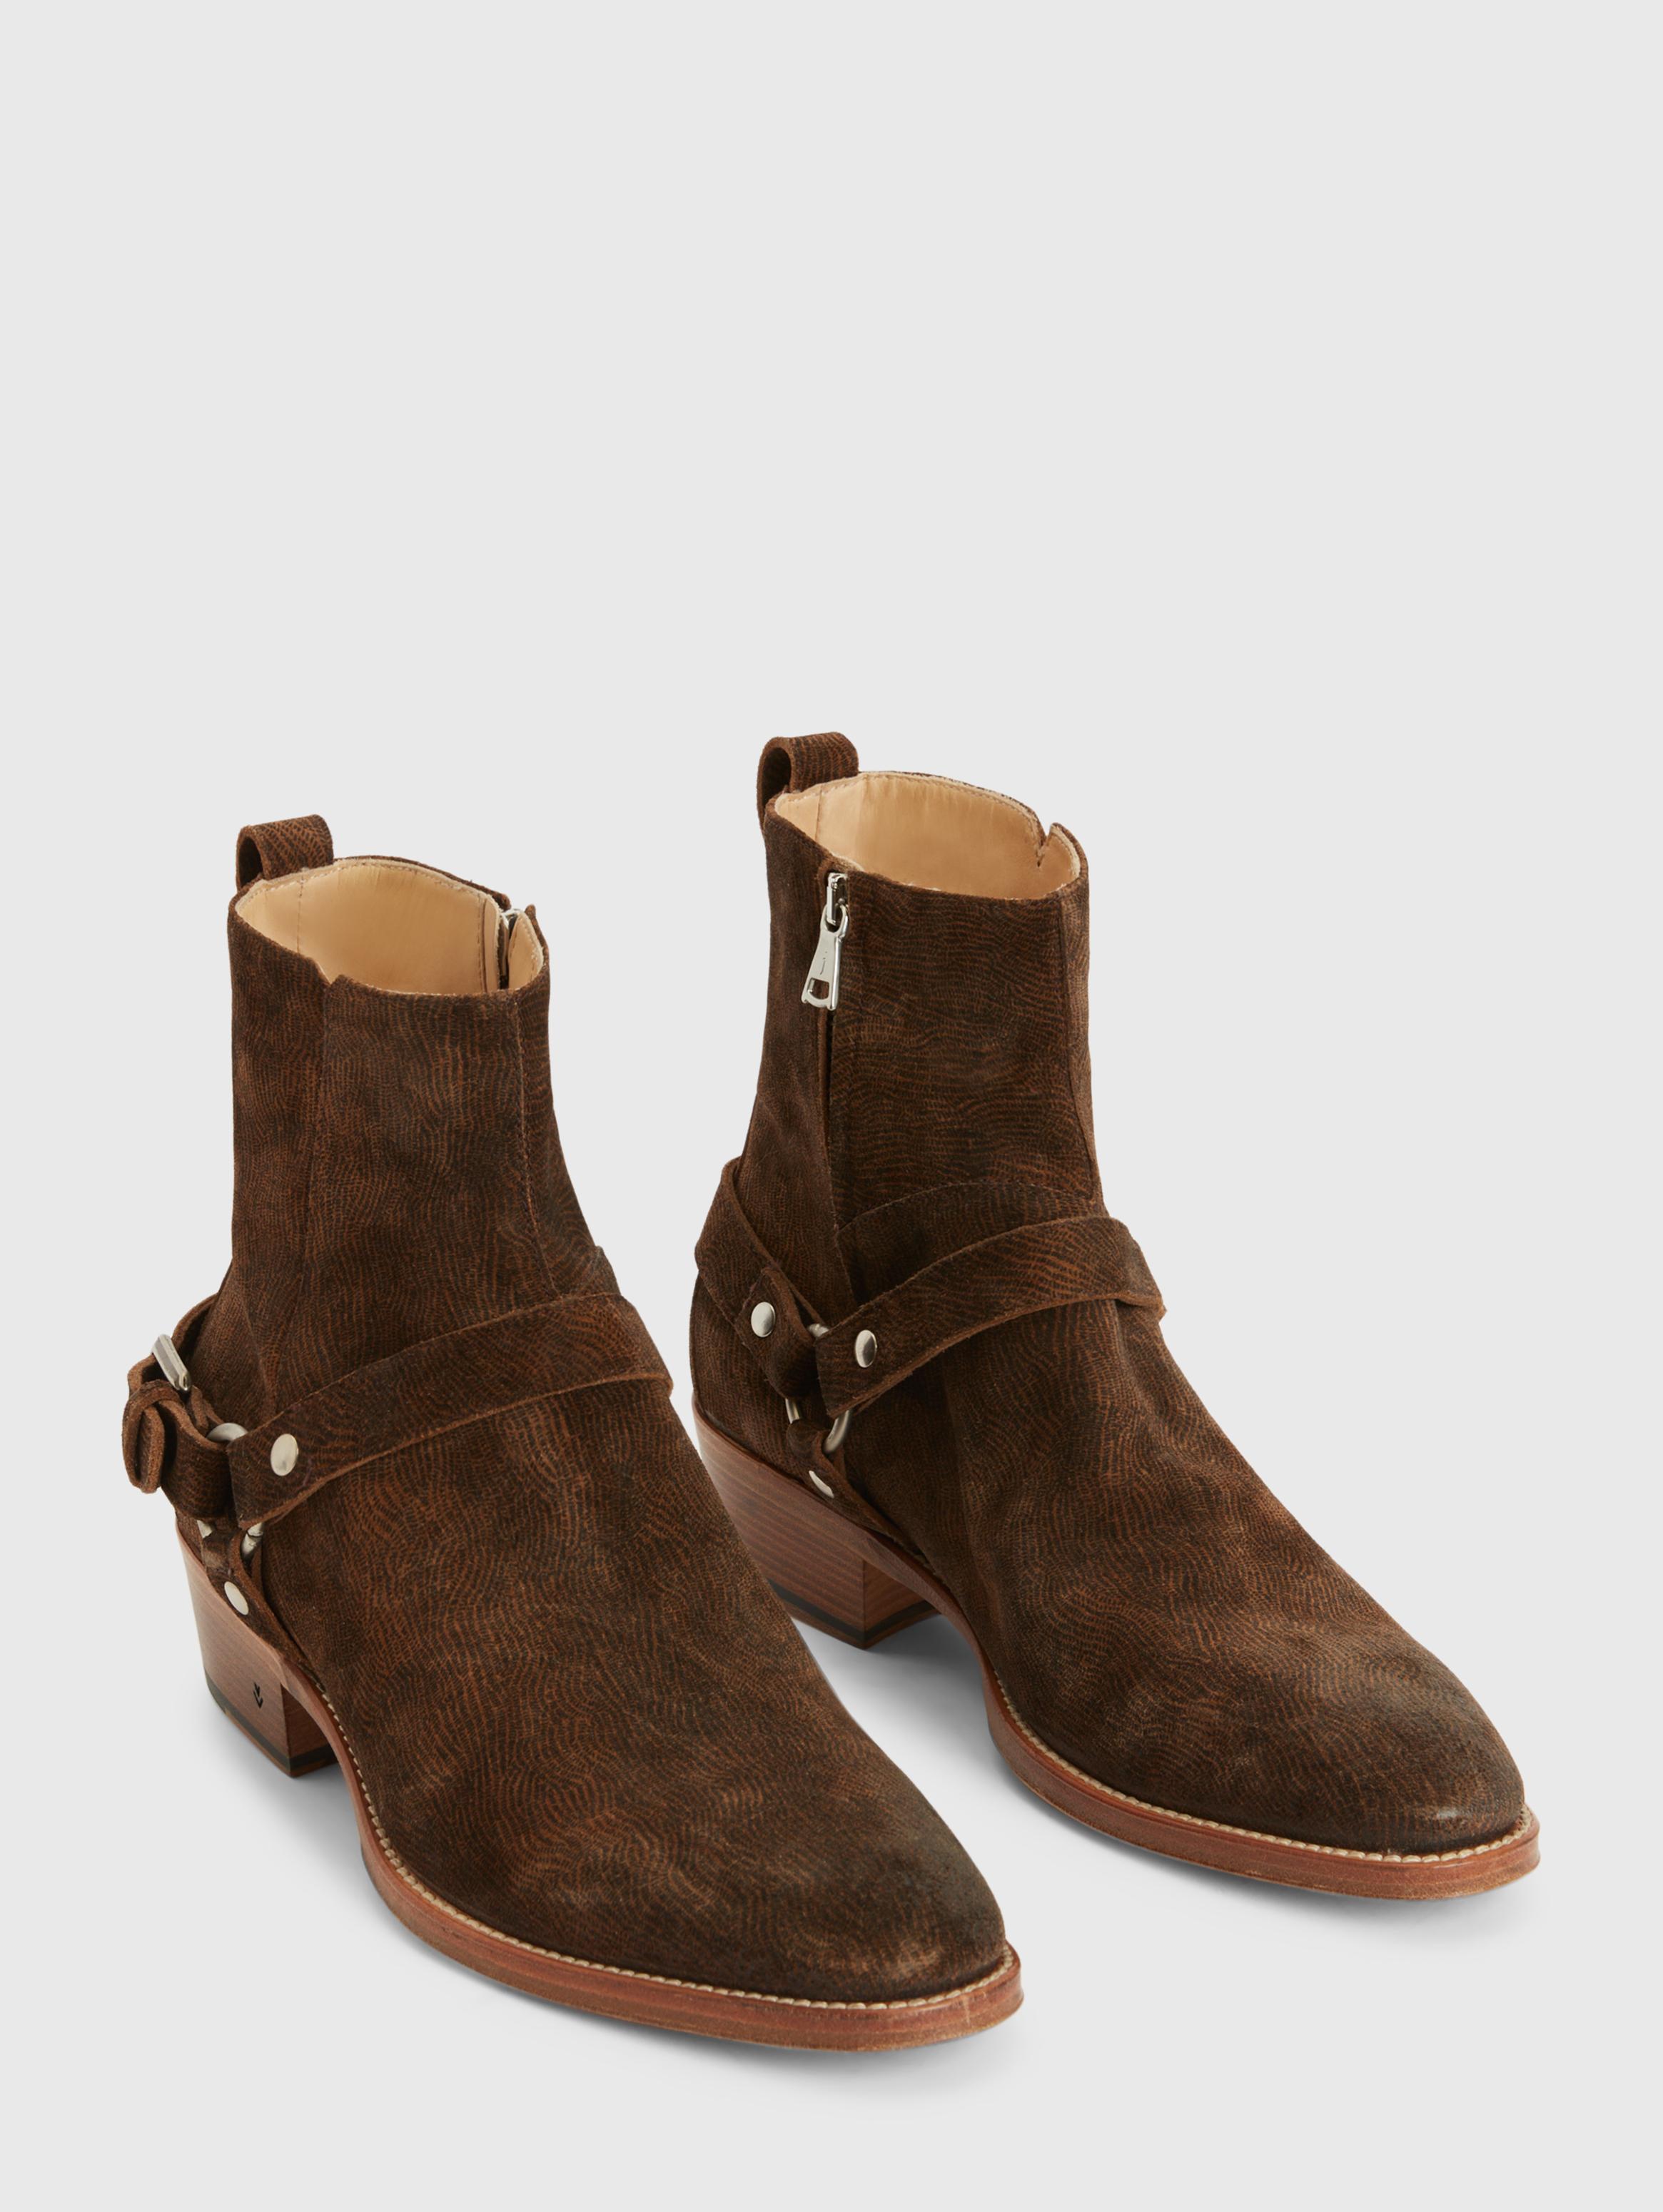 Men's Shoes | Boots, Sneakers & Loafers | John Varvatos